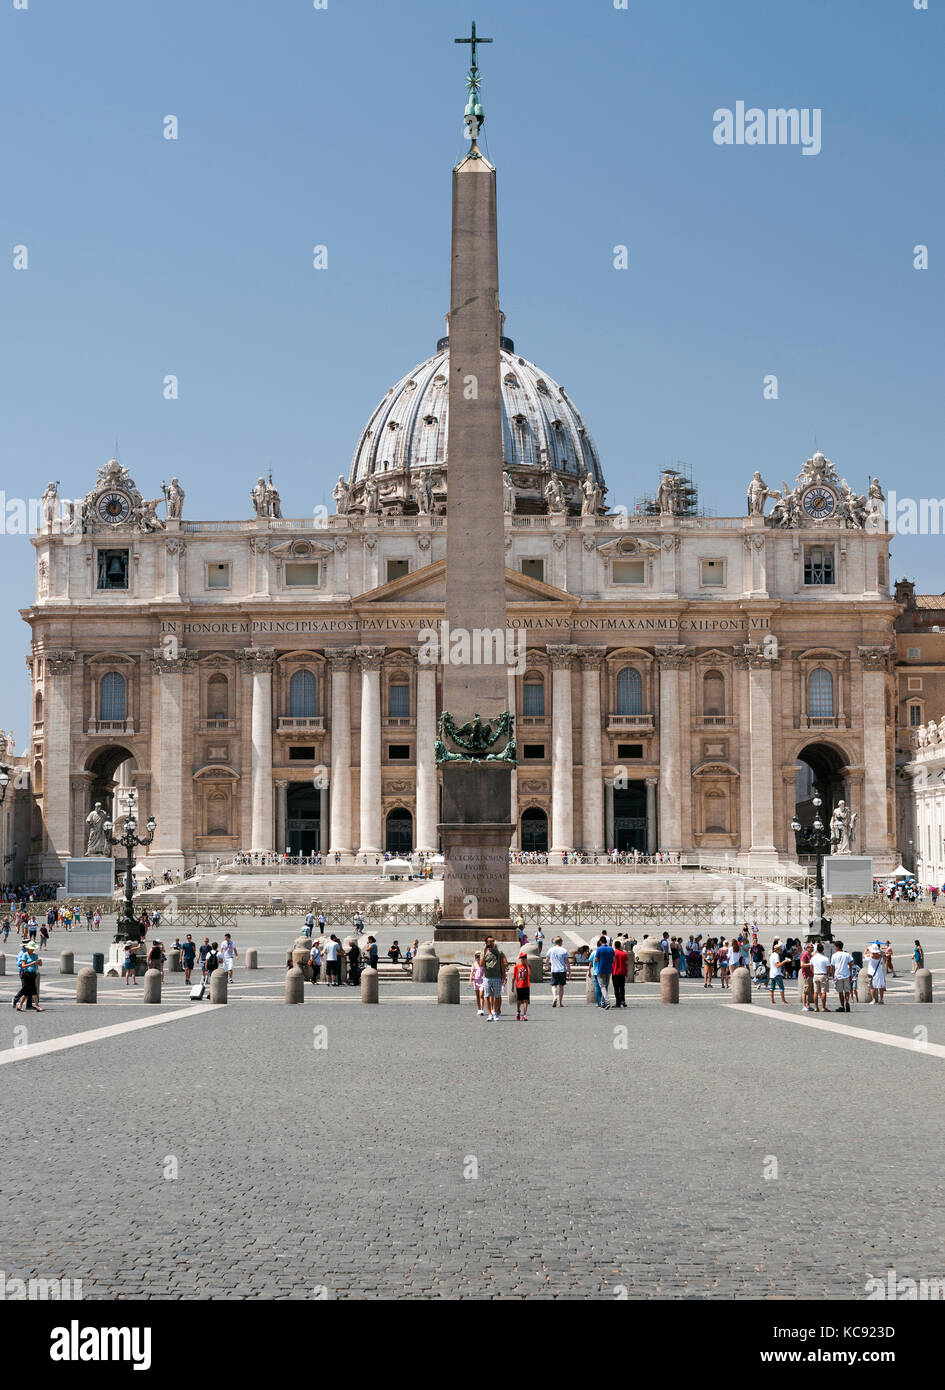 St. Peter's Square / plaza (Italian: Piazza San Pietro) and St Peter's Basilica in the Vatican City, Rome. Stock Photo